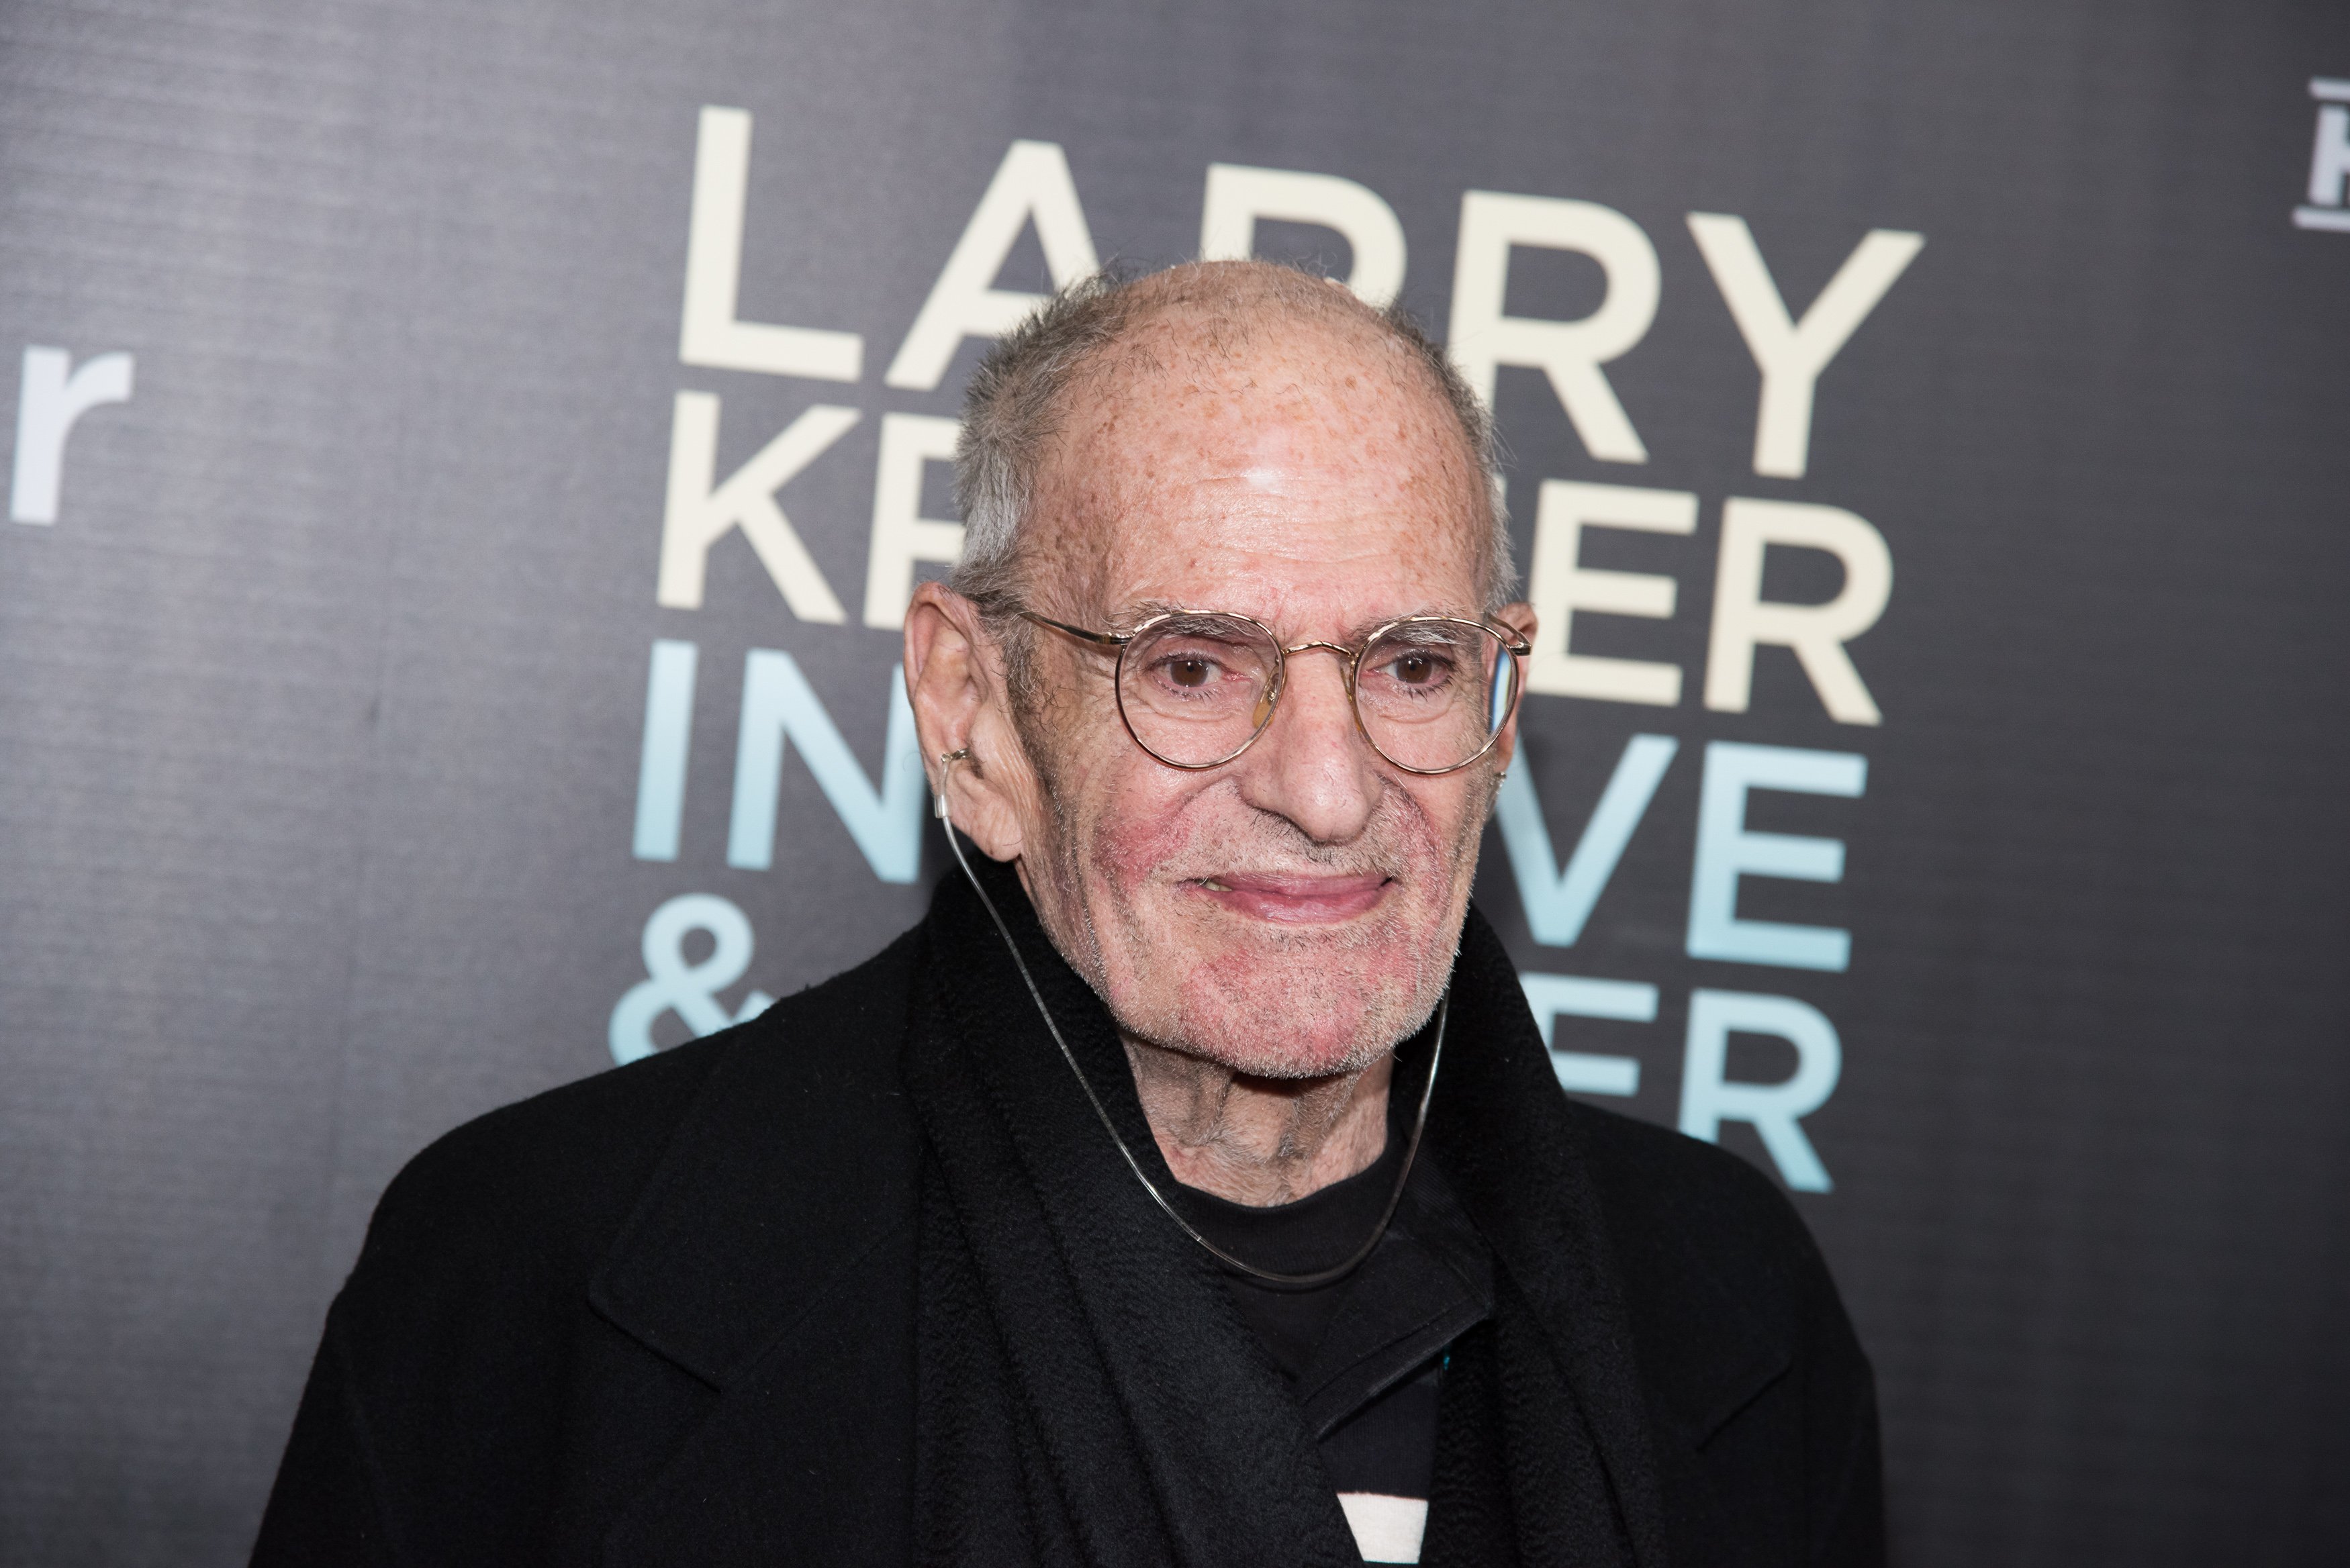 Larry Kramer attends the "Larry Kramer In Love And Anger" New York premiere at Time Warner Center on June 1, 2015 in New York City | Photo: GettyImages